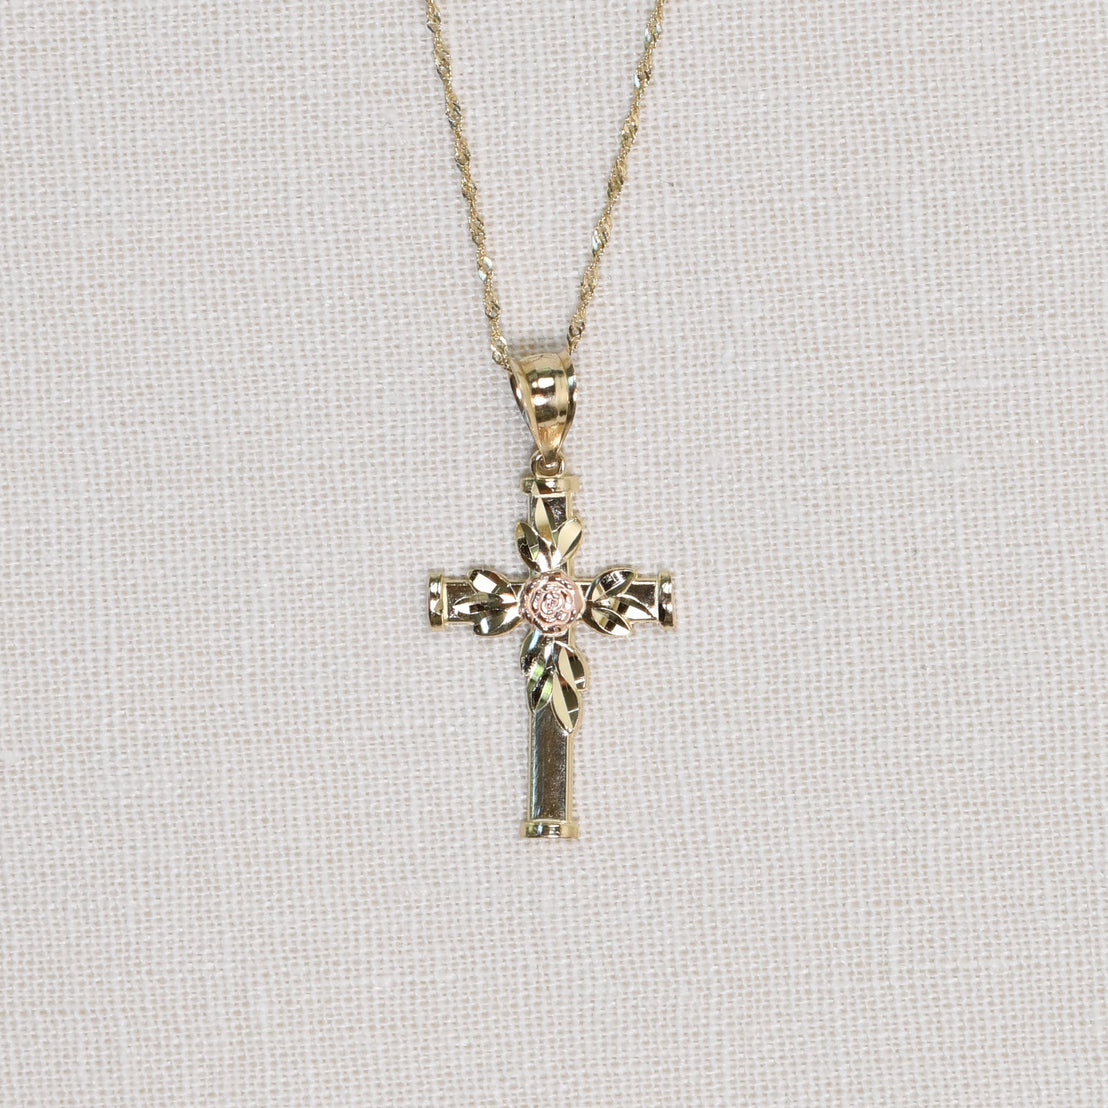 Solid gold cross with gold leaves and rose gold rose detail on chain